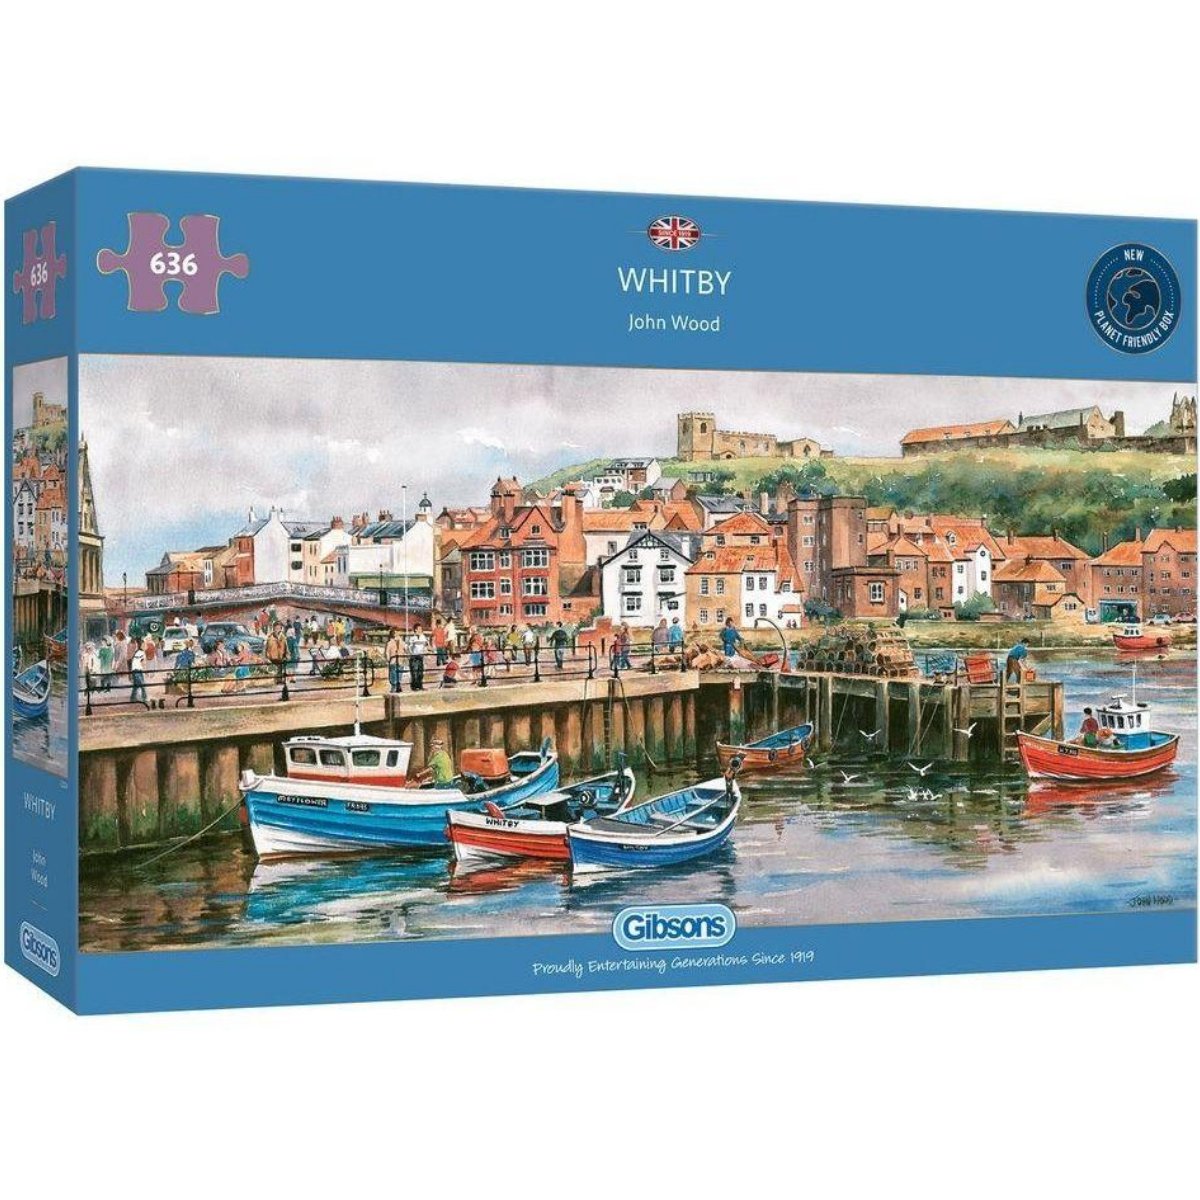 Gibsons Whitby Harbour Jigsaw Puzzle (636 Pieces) - Phillips Hobbies